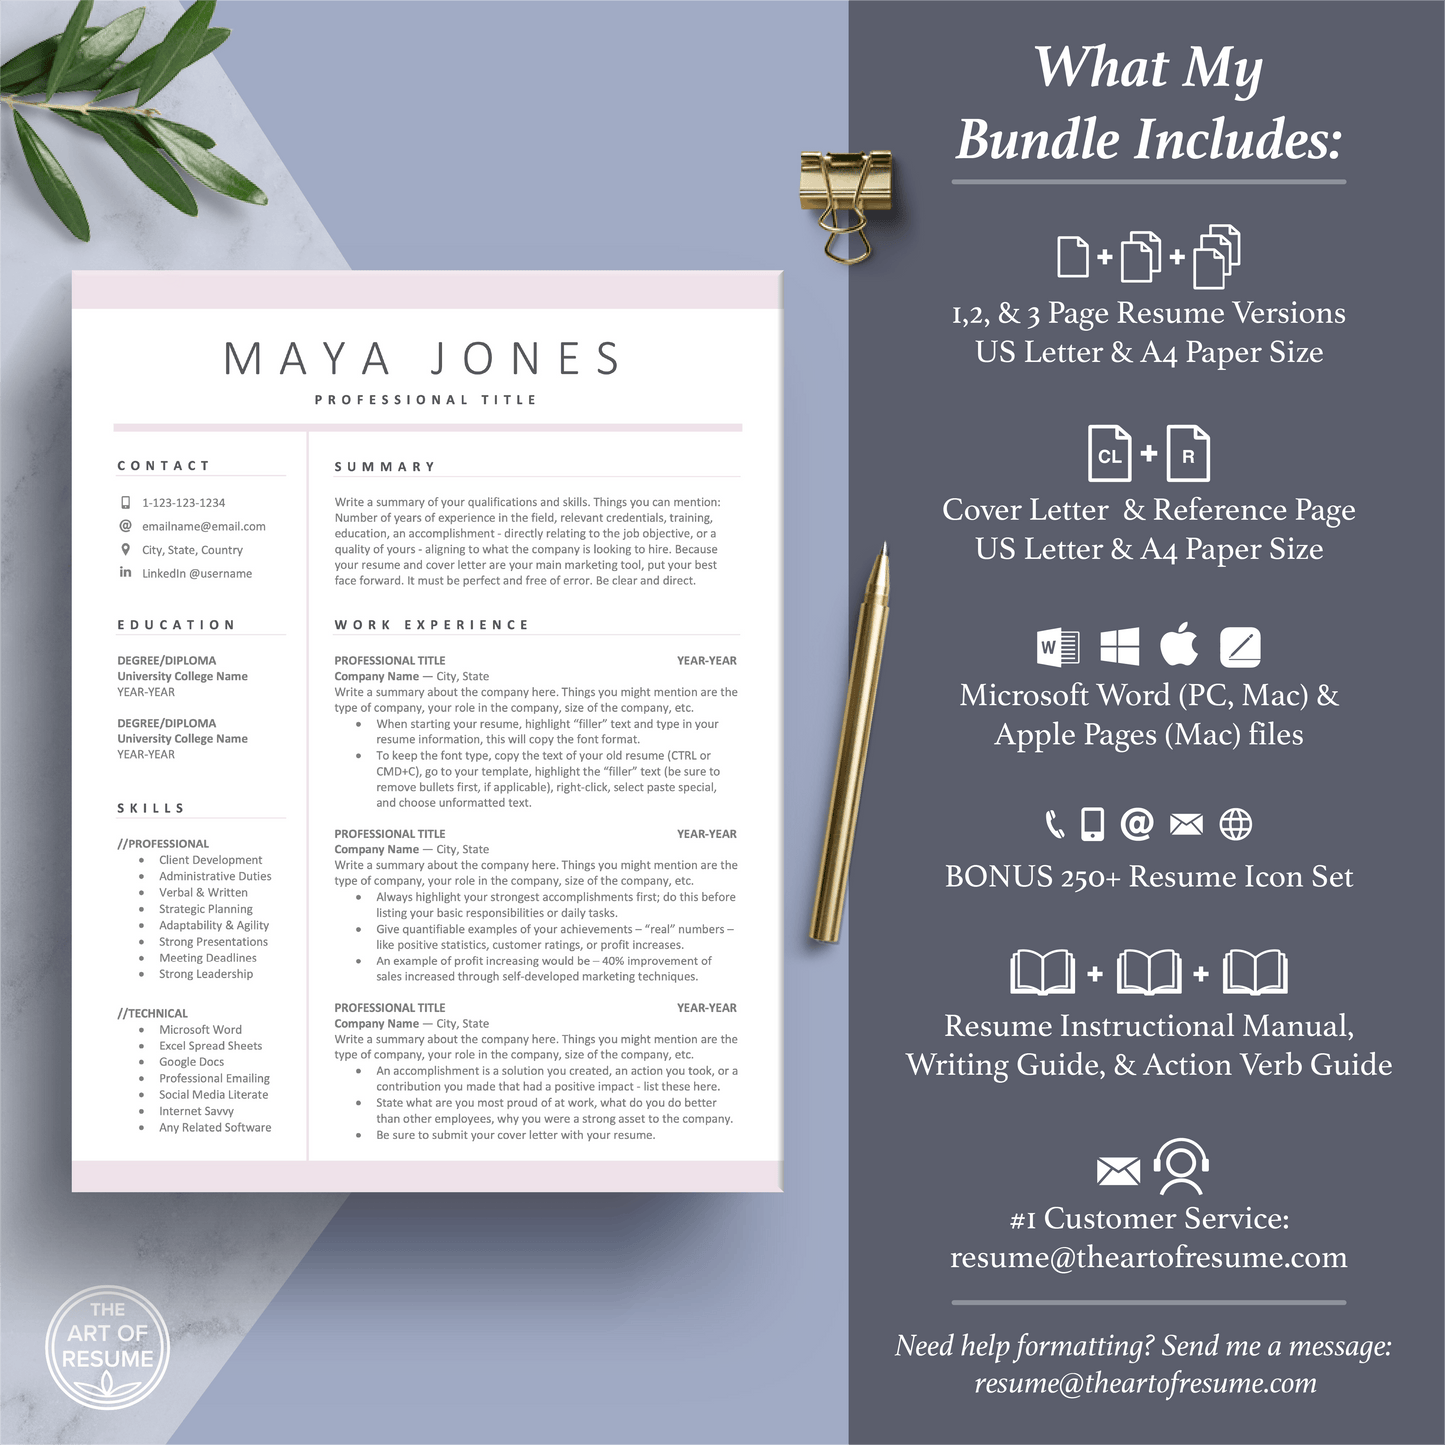 The Art of Resume Templates | Professional Pink Resume CV Template Maker 3, Cover Letter, Reference Page, Mac, PC, A4 Paper, US size, Free Guide, The Art of Resume Writing, 250 Bonus Resume Icons